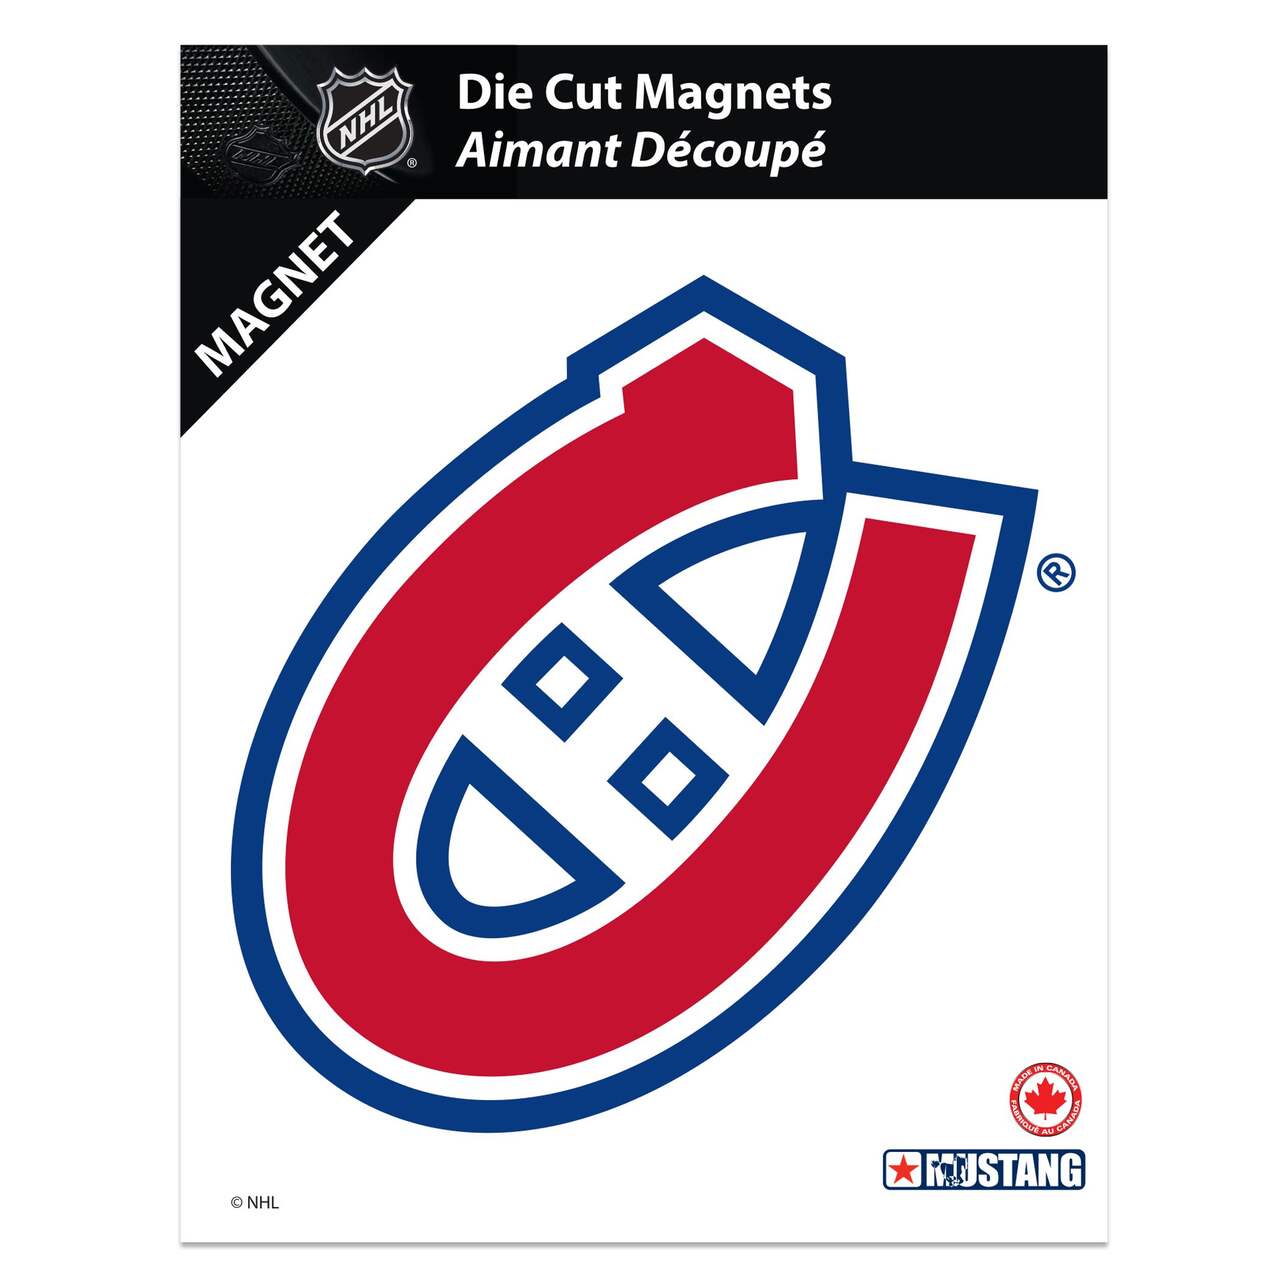 NHL Montreal Canadiens Single-Sided Logo Banner Flag, 3' x 5